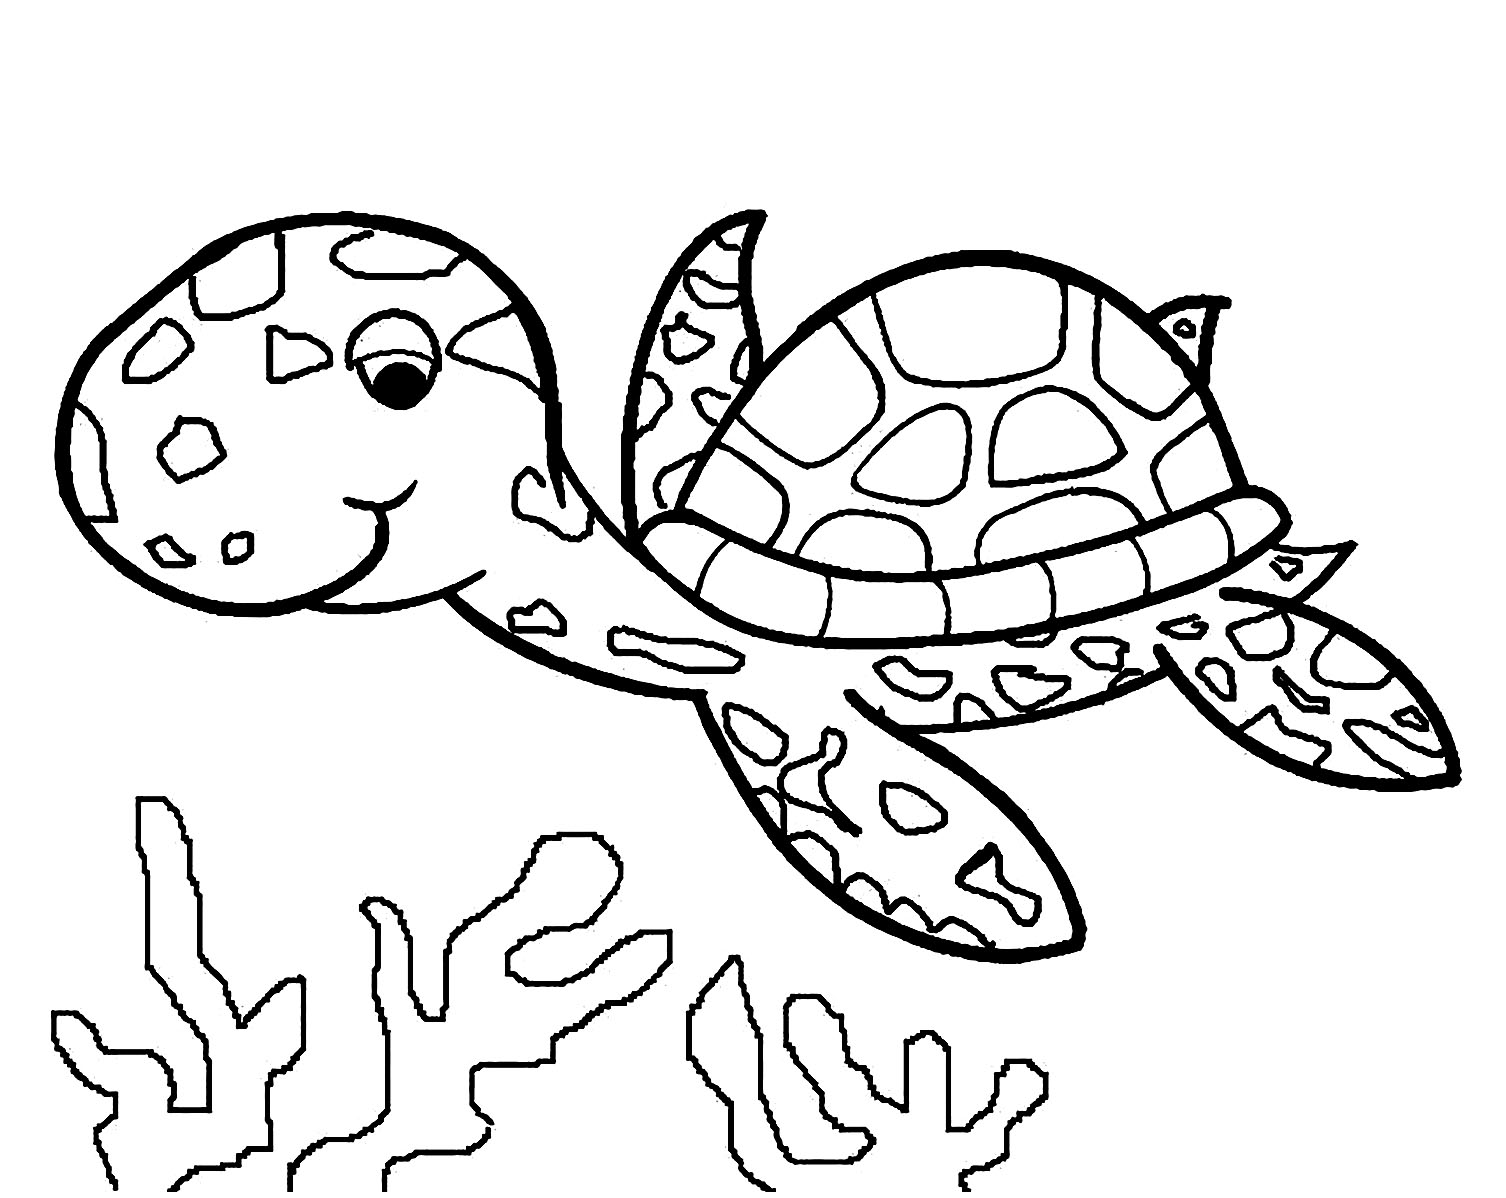 Download Turtles to print for free - Turtles Kids Coloring Pages